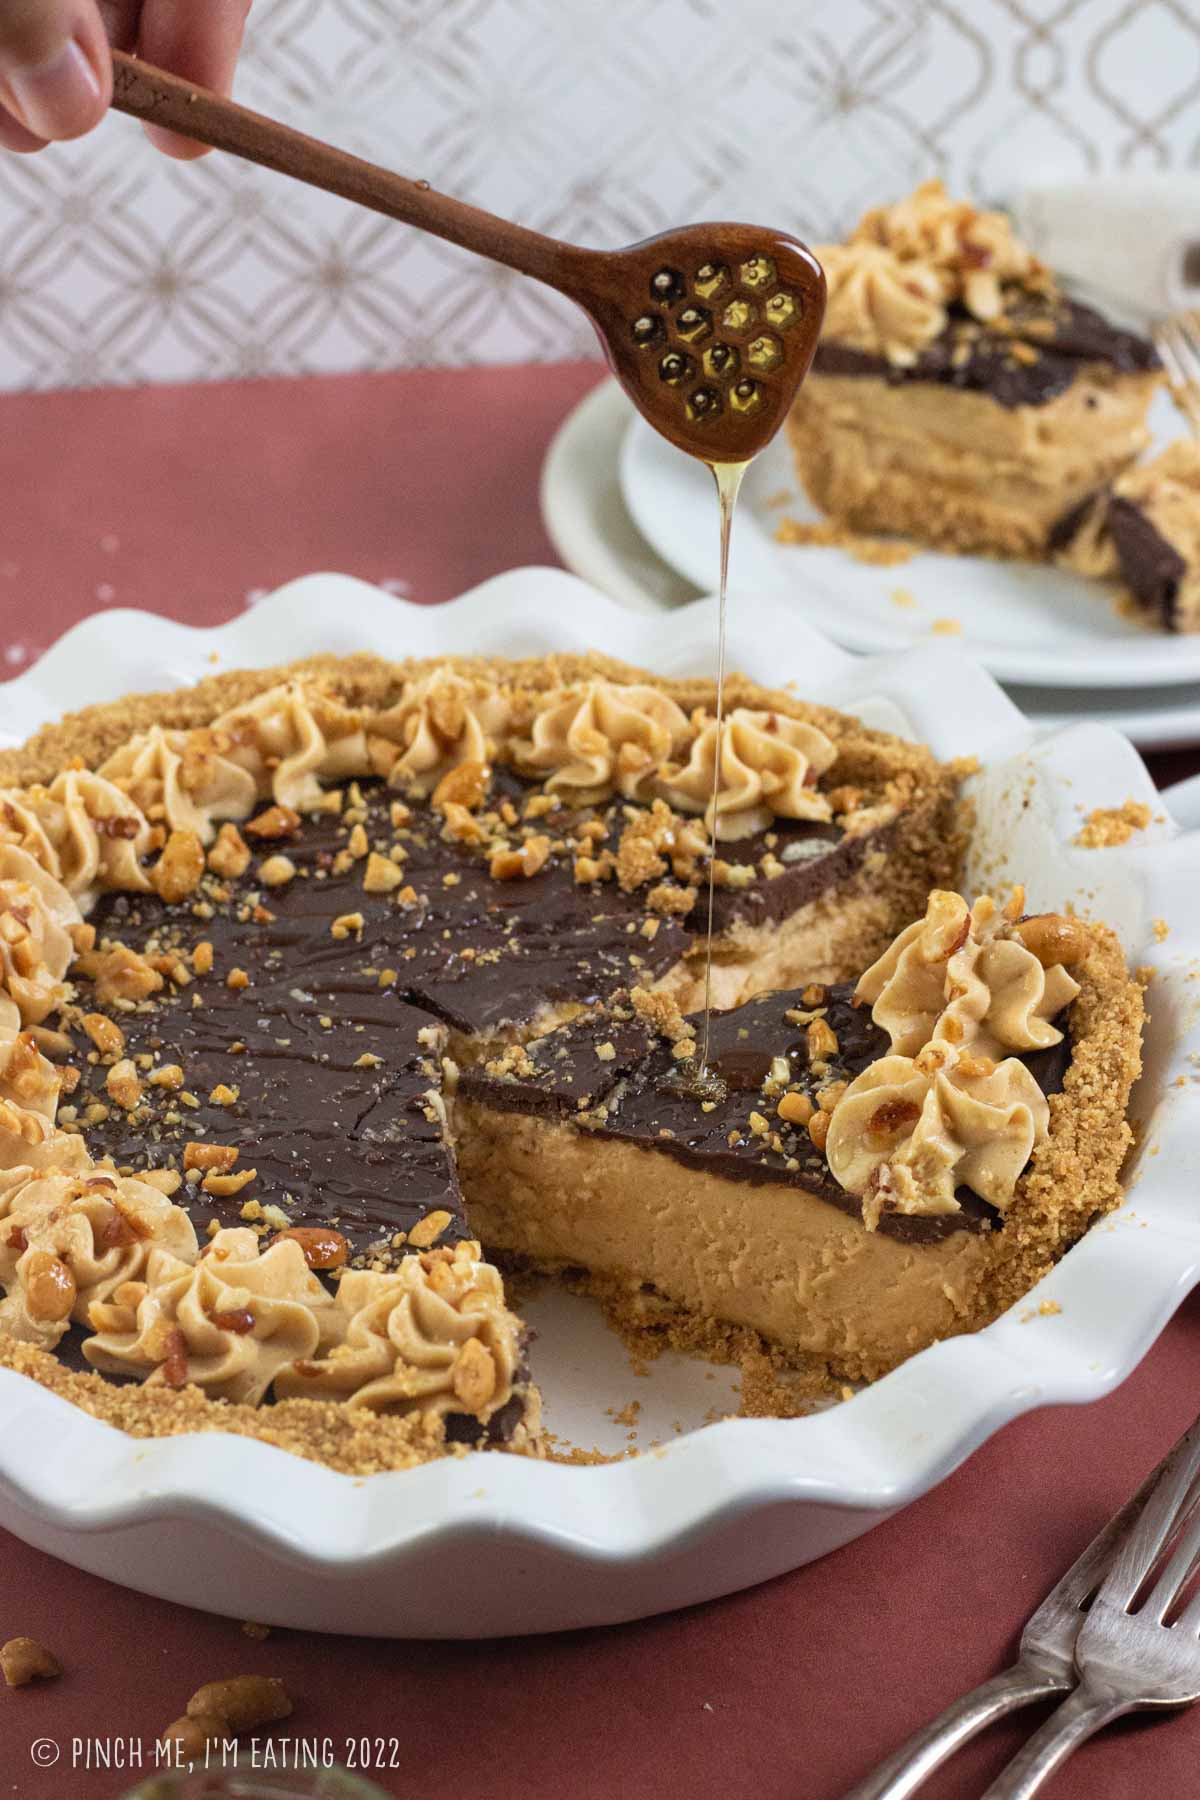 Honey drizzling on top of a peanut butter pie with graham cracker crust and chocolate ganache in a white pie plate.